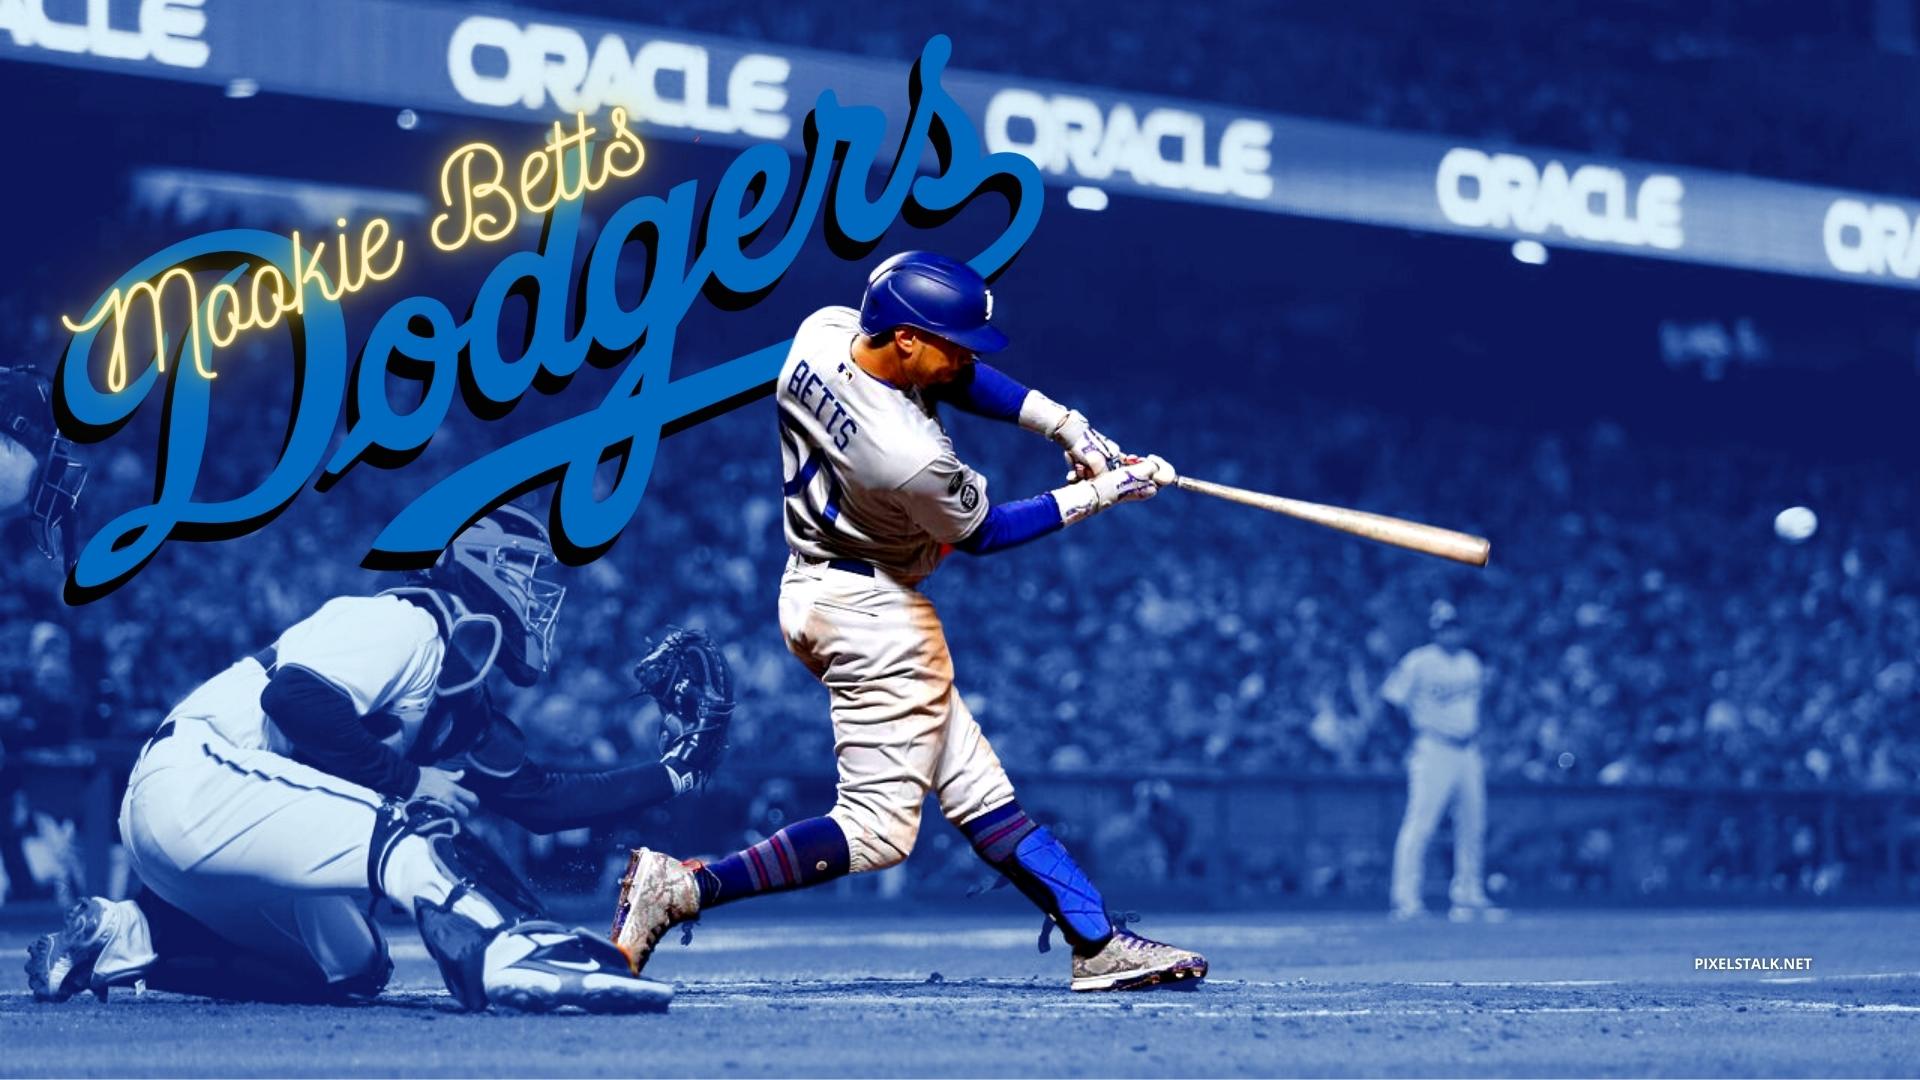 Download Free 100 + mookie betts dodgers Wallpapers